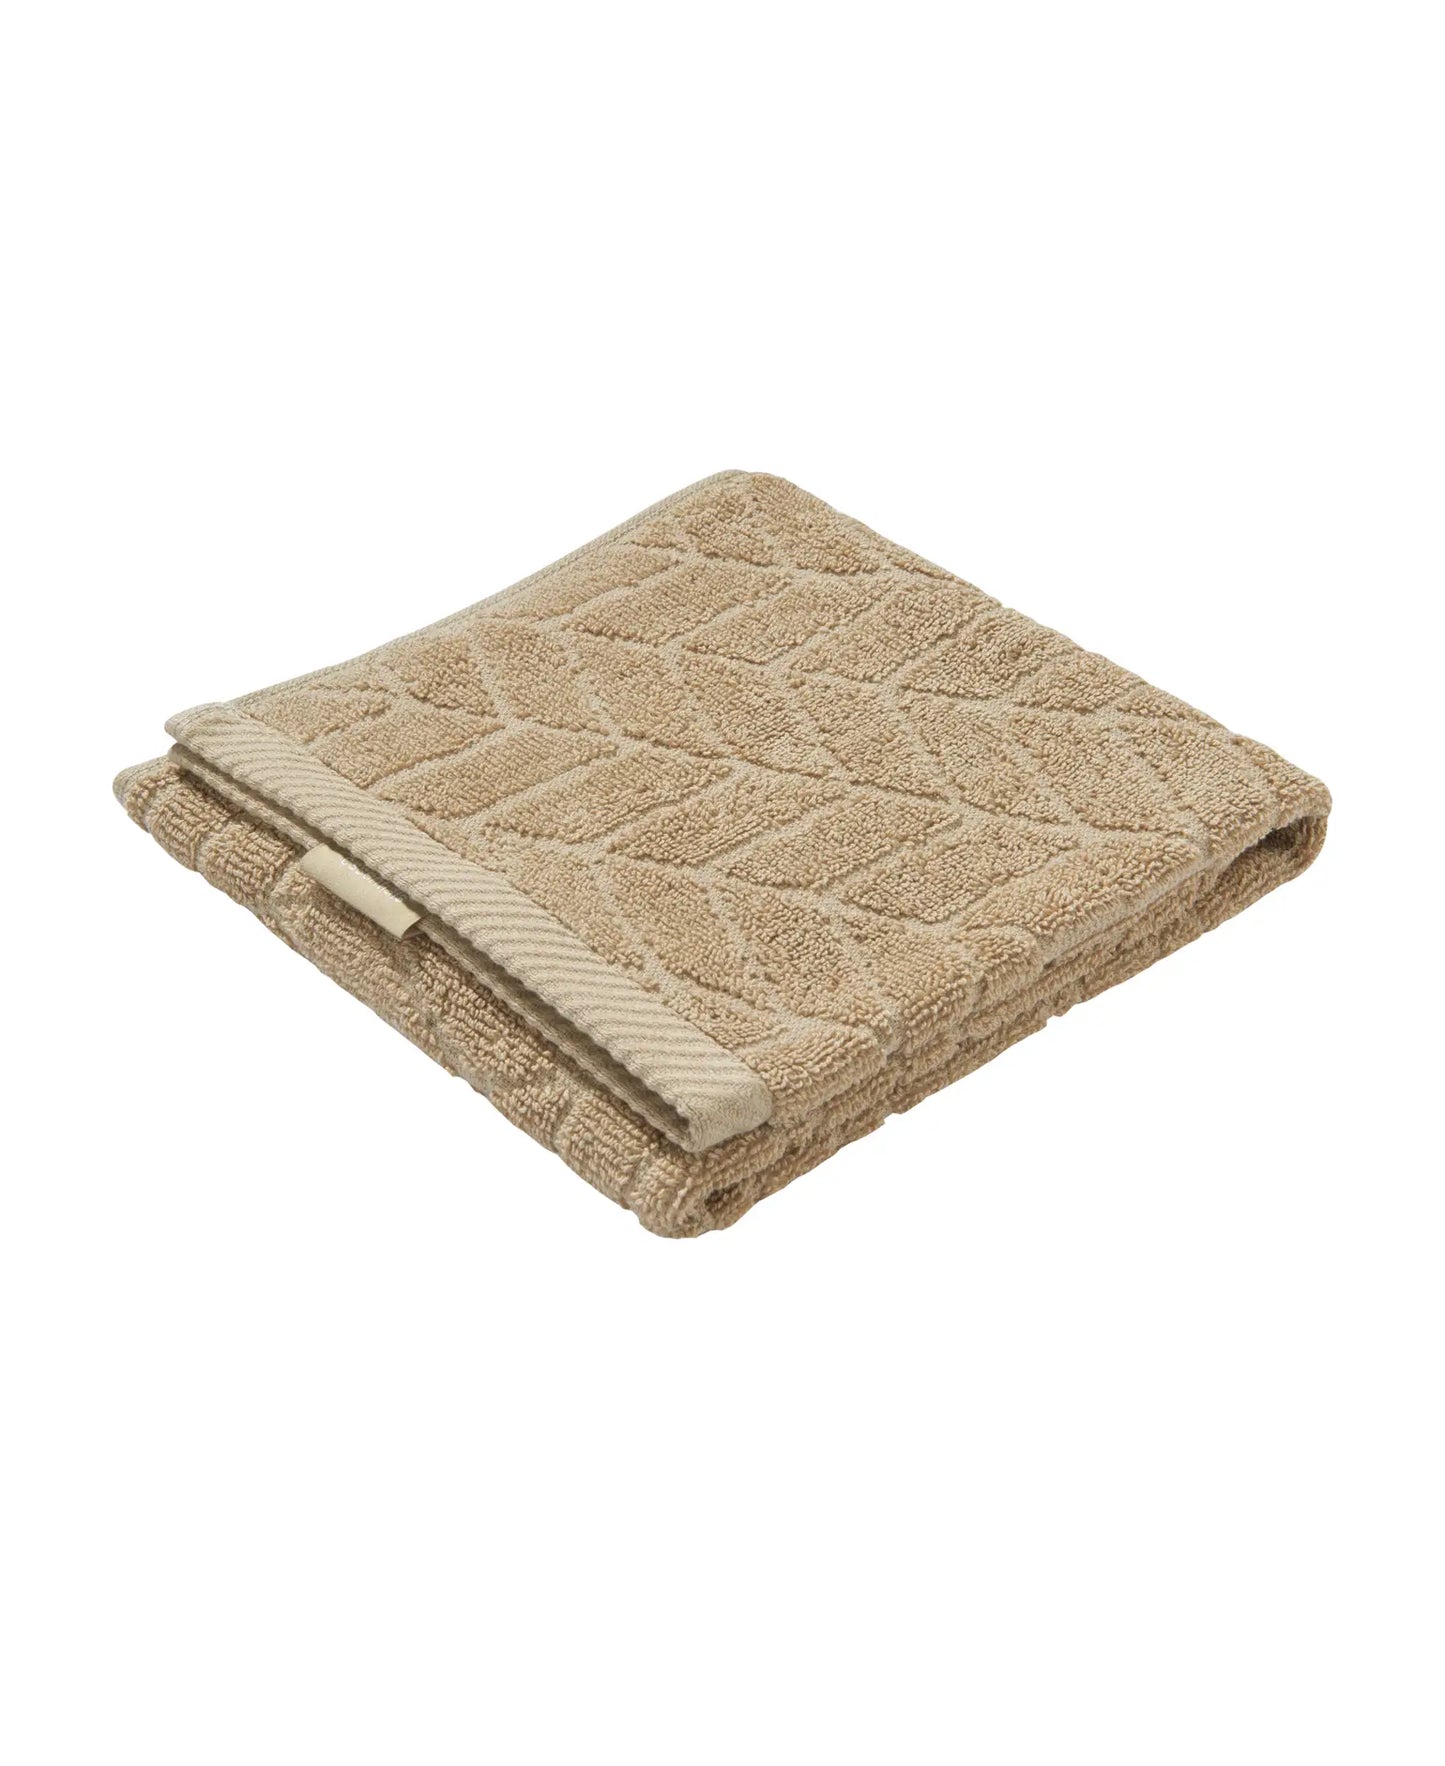 Cotton Terry Ultrasoft and Durable Patterned Hand Towel - Camel-2